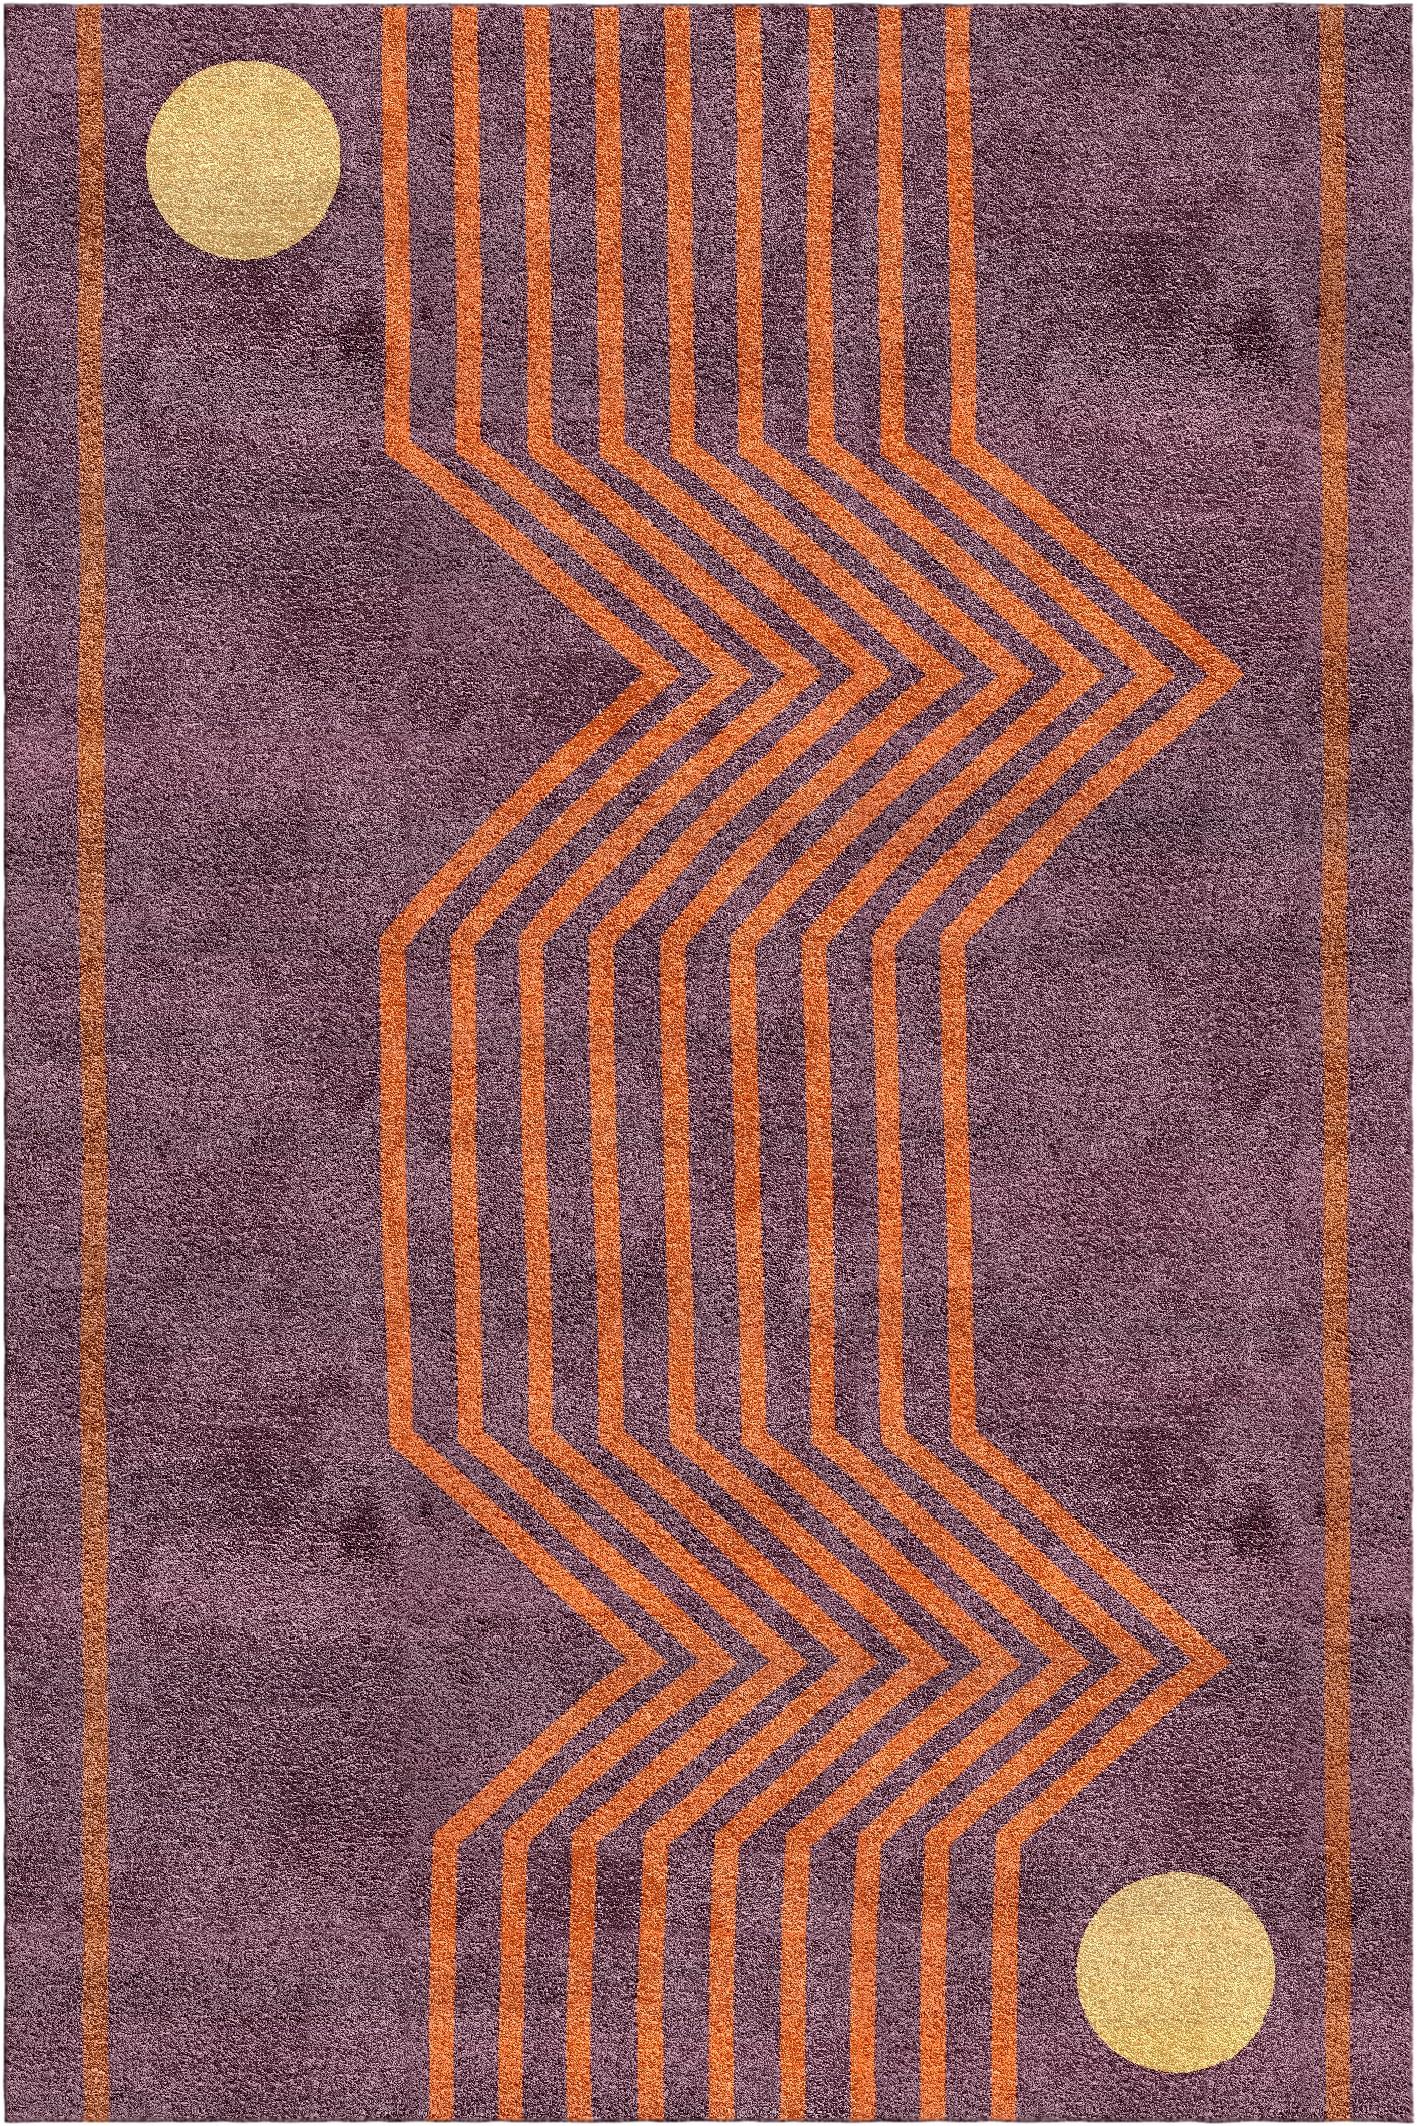 Futuro rug III by Vanessa Ordoñez
Dimensions: D 300 x W 200 x H 1.5 cm
Materials: bamboo fibers and linen

A striking design by Vanessa Ordoñez, this gorgeous rug will add sophistication and allure in any contemporary home. Hand-tufted in Europe